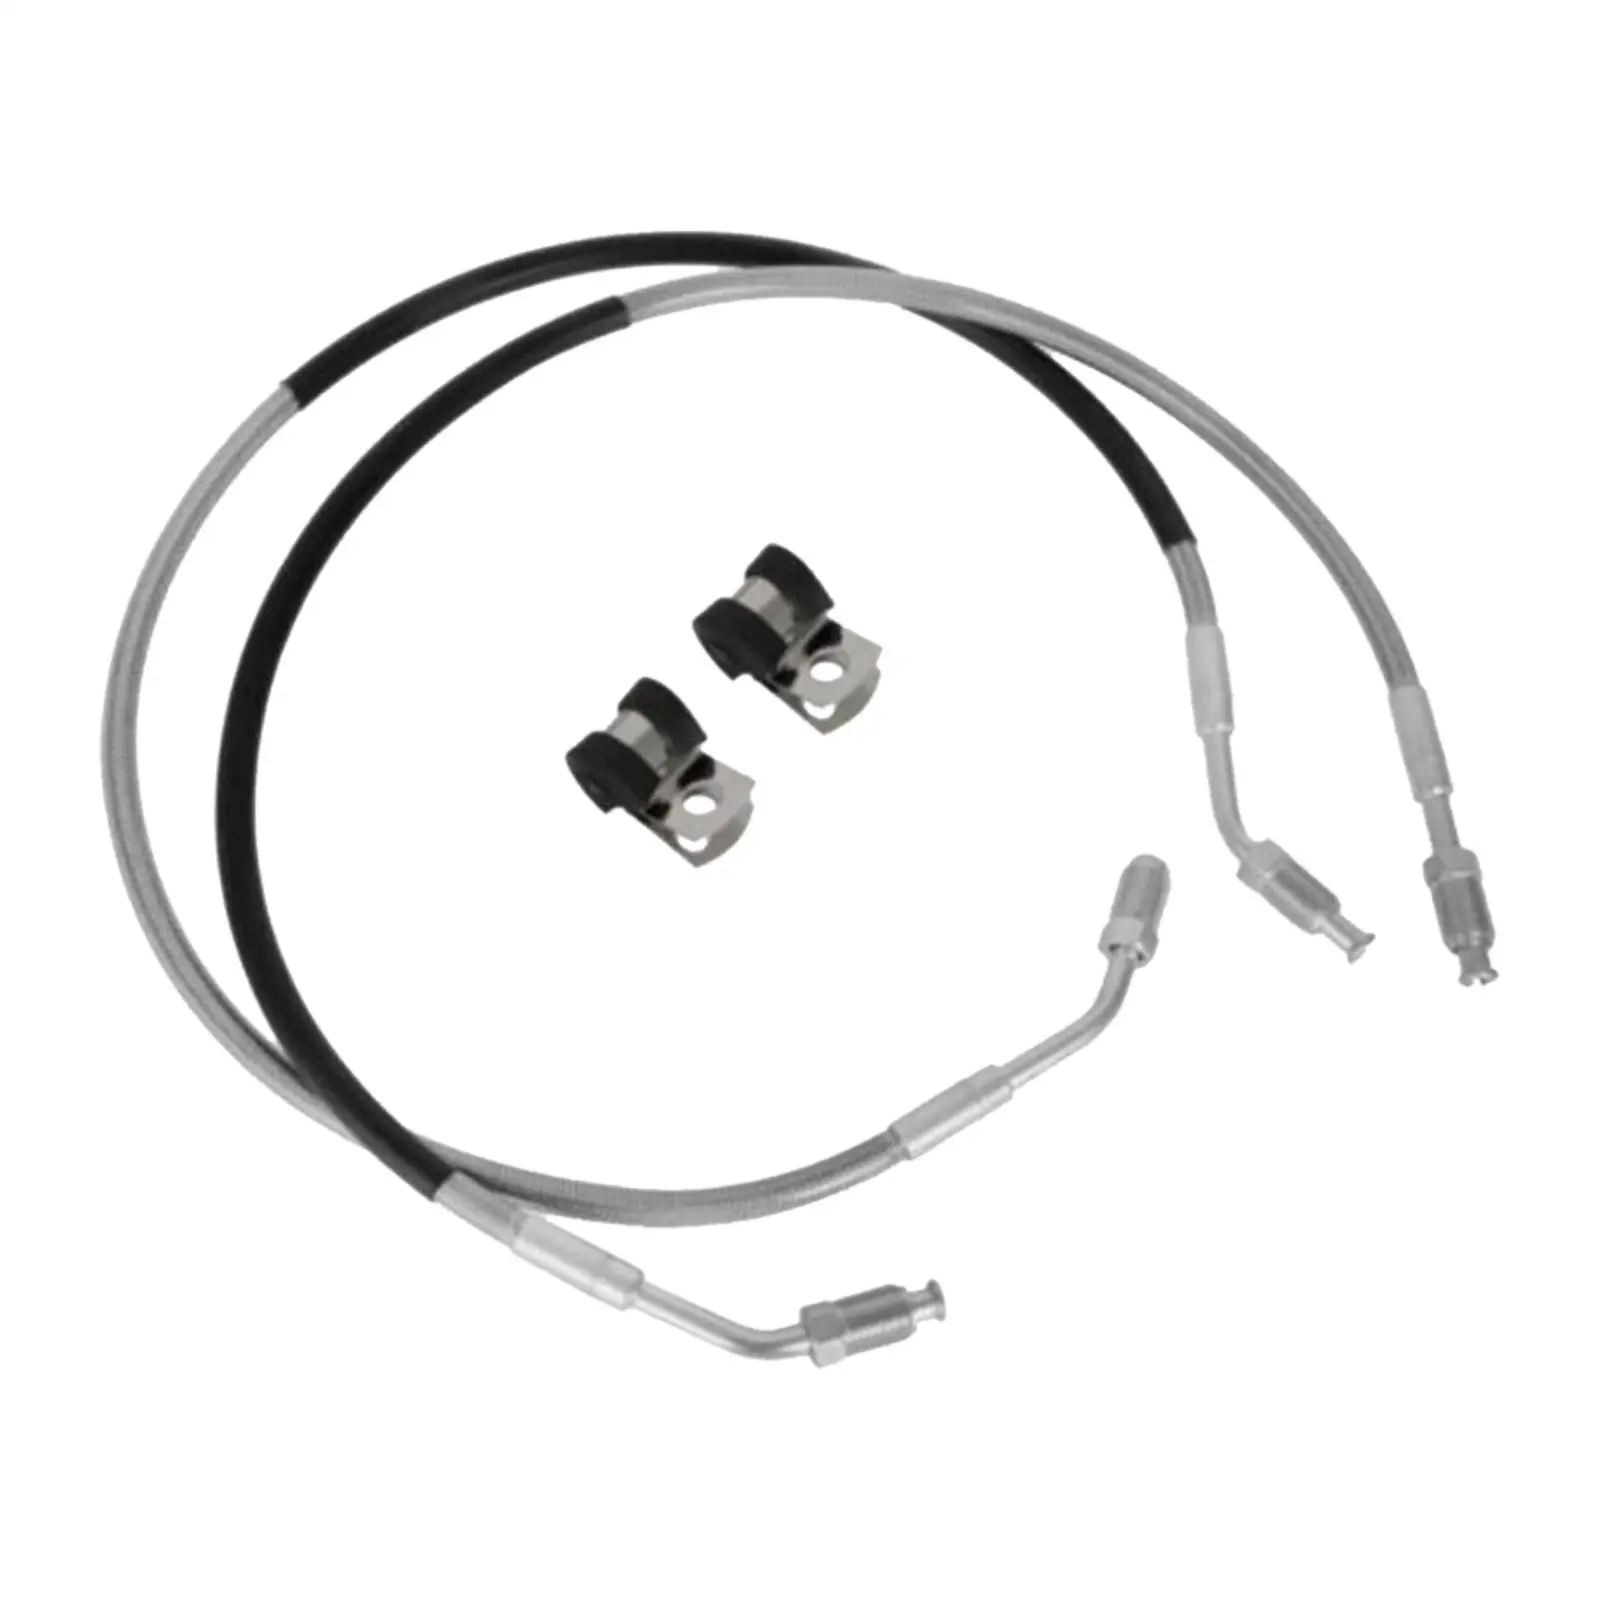 Front Left Right Brake Line 1930752 1930753 Accessories for Polaris ATV Xpress 300 400 Xpedition 325 425 Magnum 325 425 500